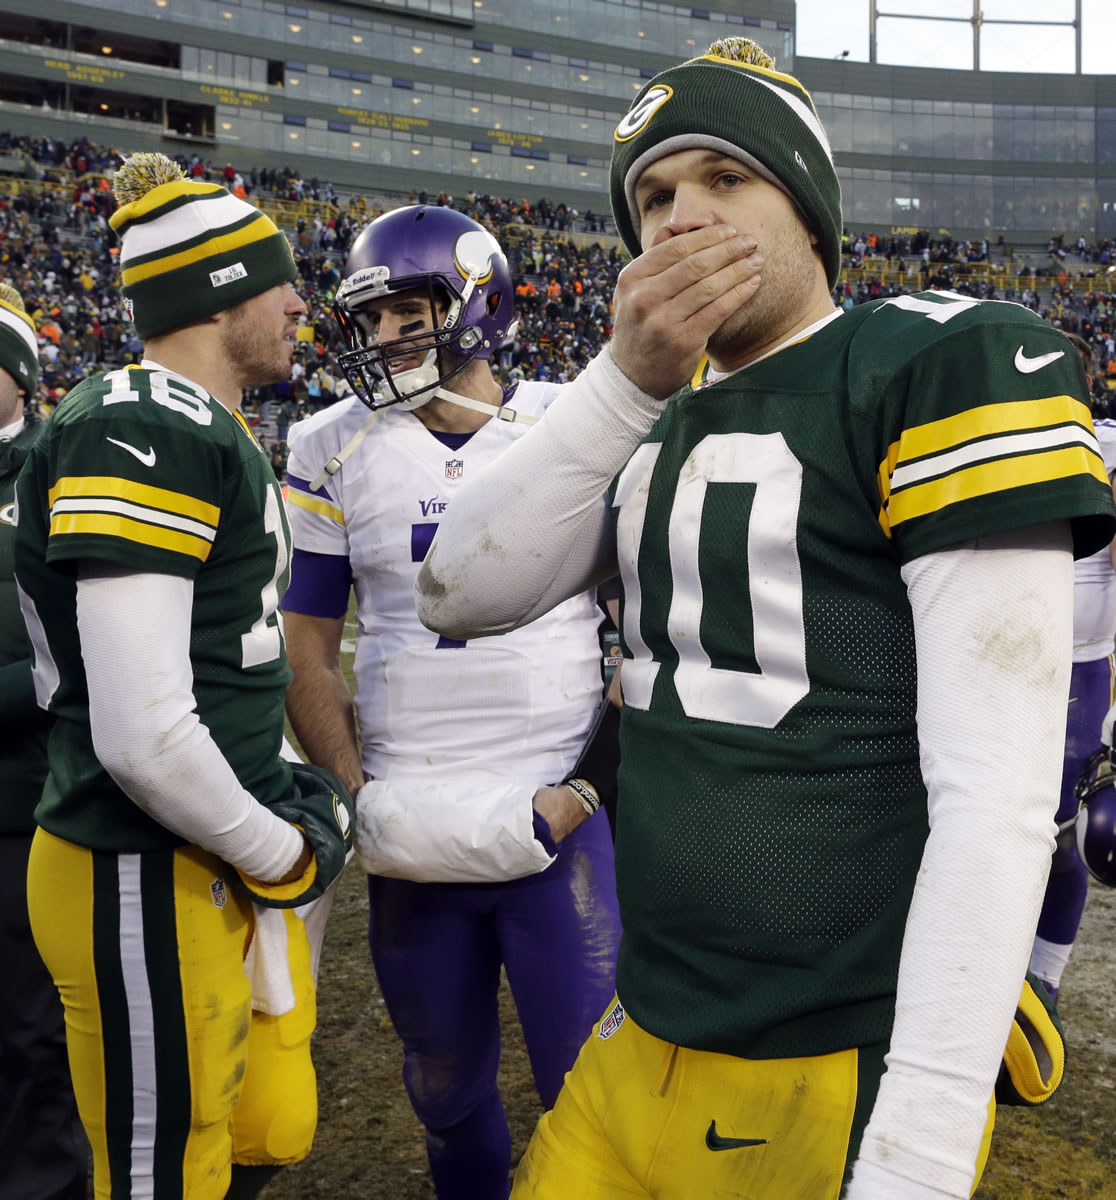 Green Bay Packers' Matt Flynn (10) covers his face as Scott Tolzien (16) talks to Minnesota Vikings' Christian Ponder after an NFL football game Sunday, Nov. 24, 2013, in Green Bay, Wis. The game ended in a tie, 26-26.